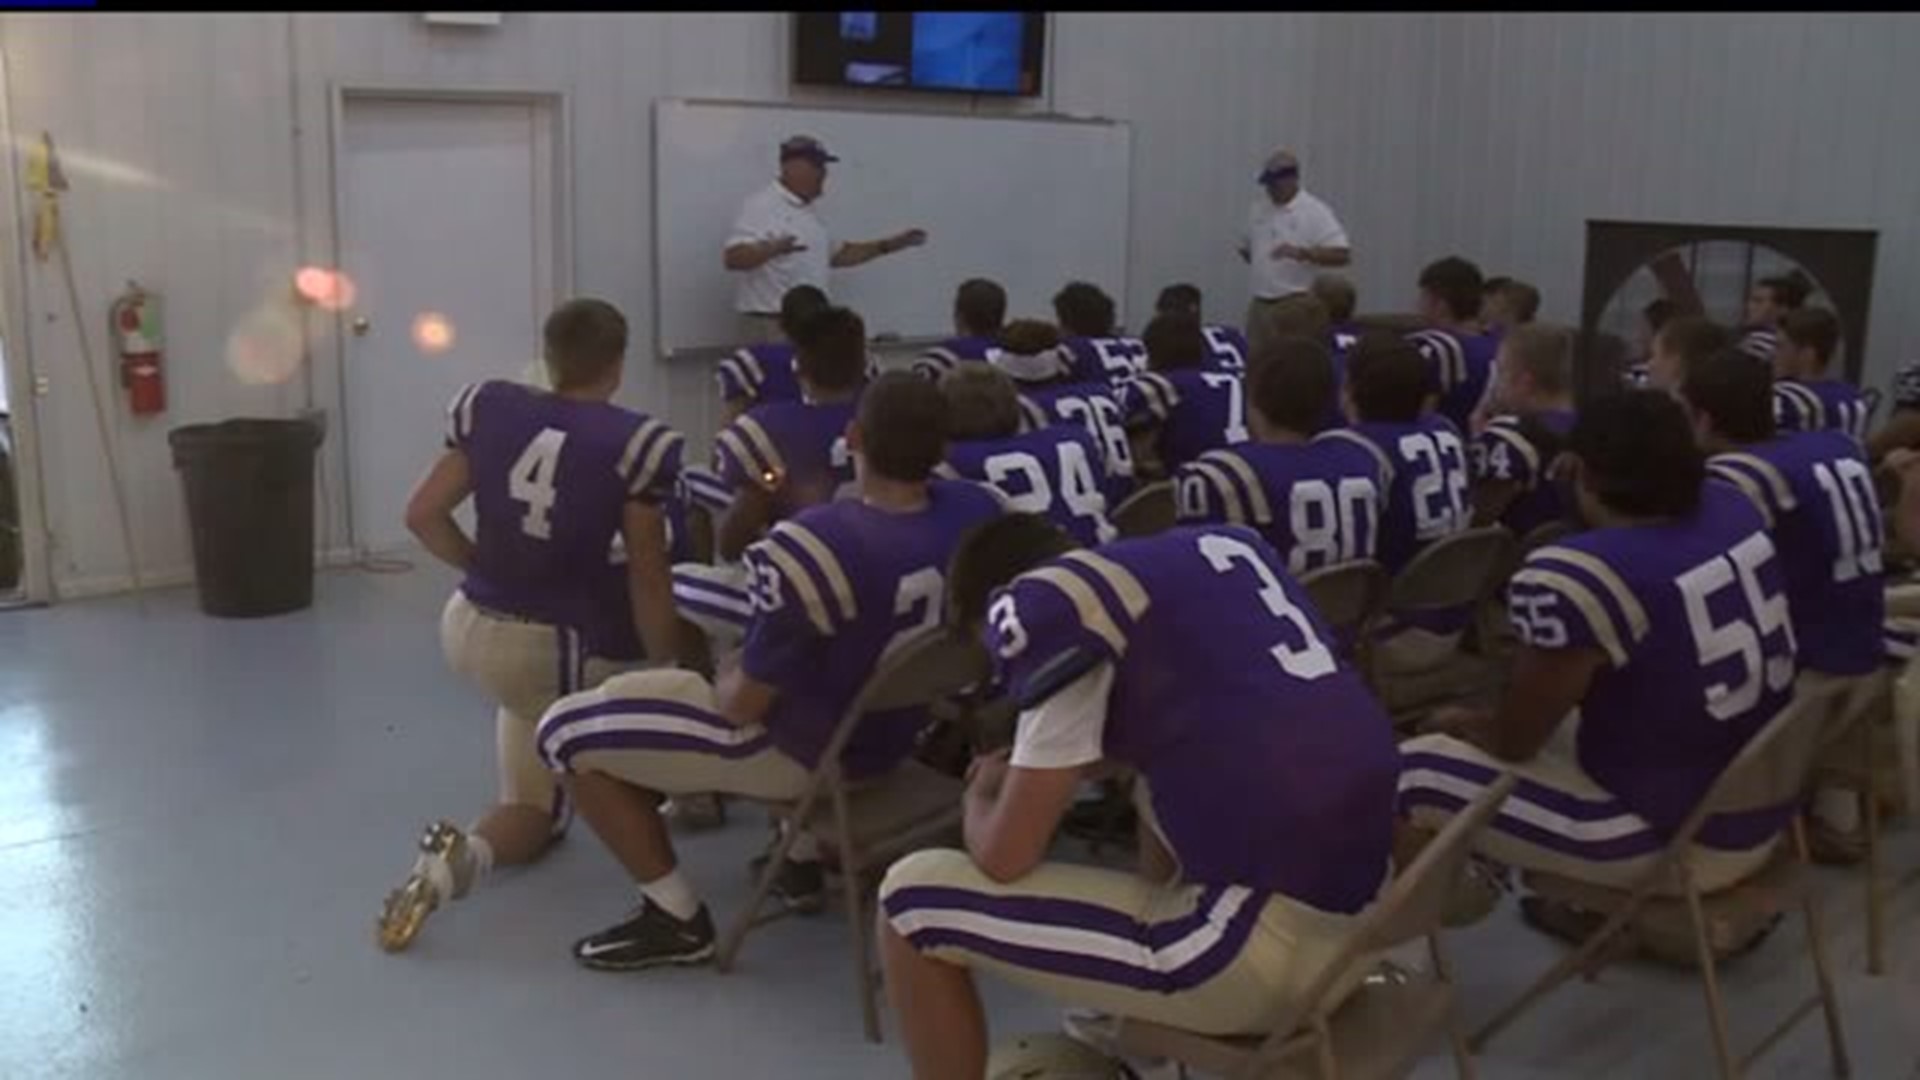 The Score: Muskies coach gives awesome pep talk